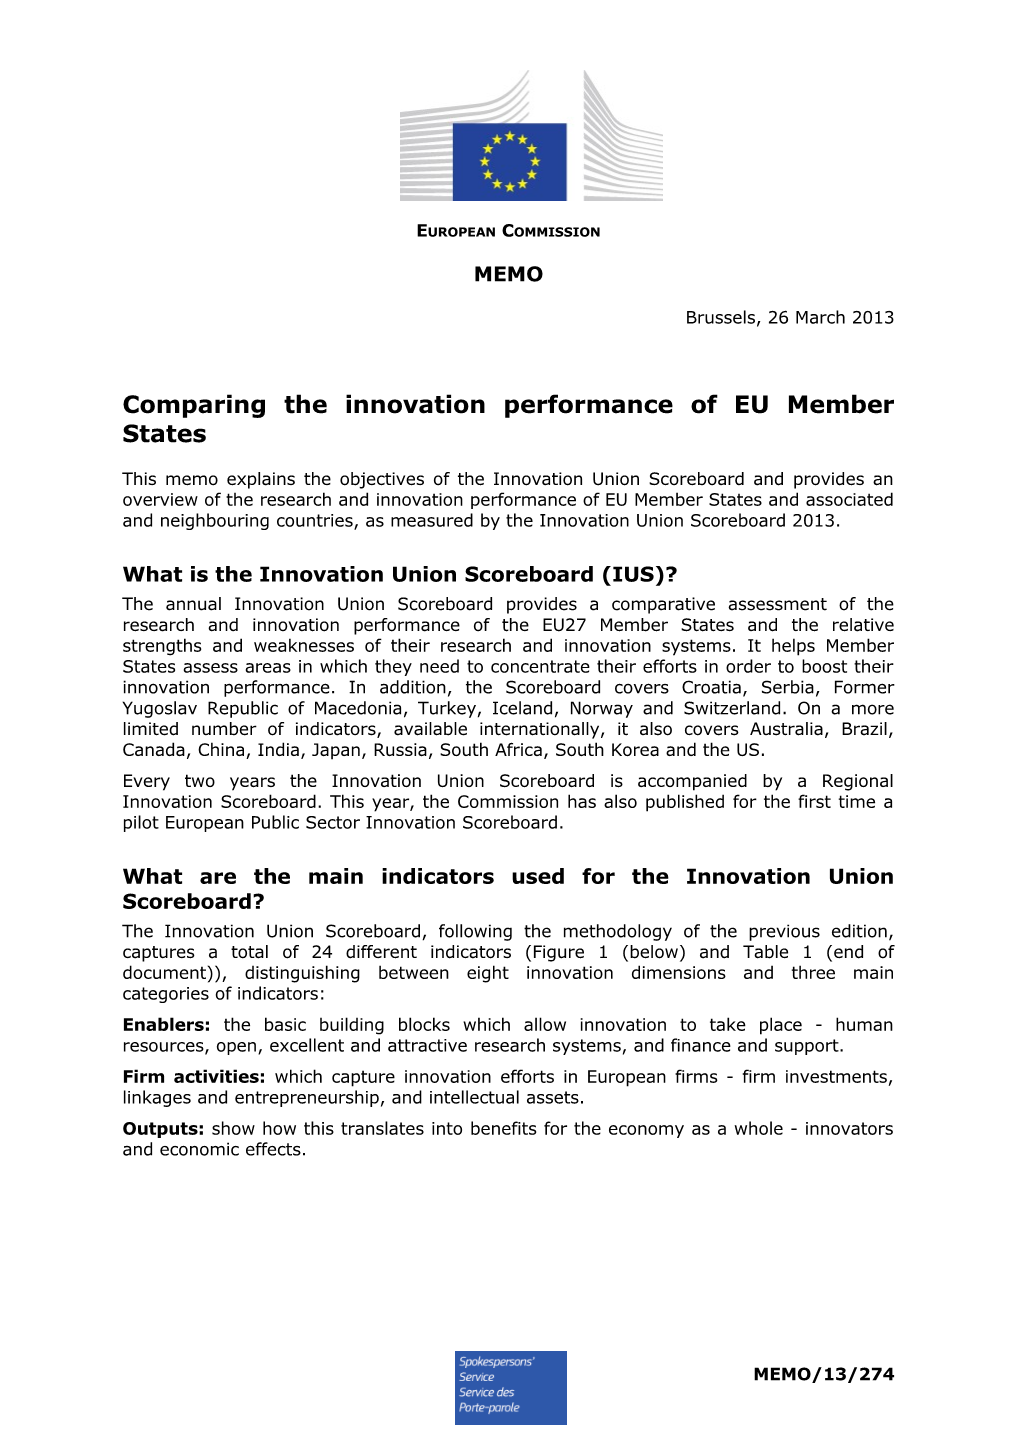 Comparing the Innovation Performance of EU Member States